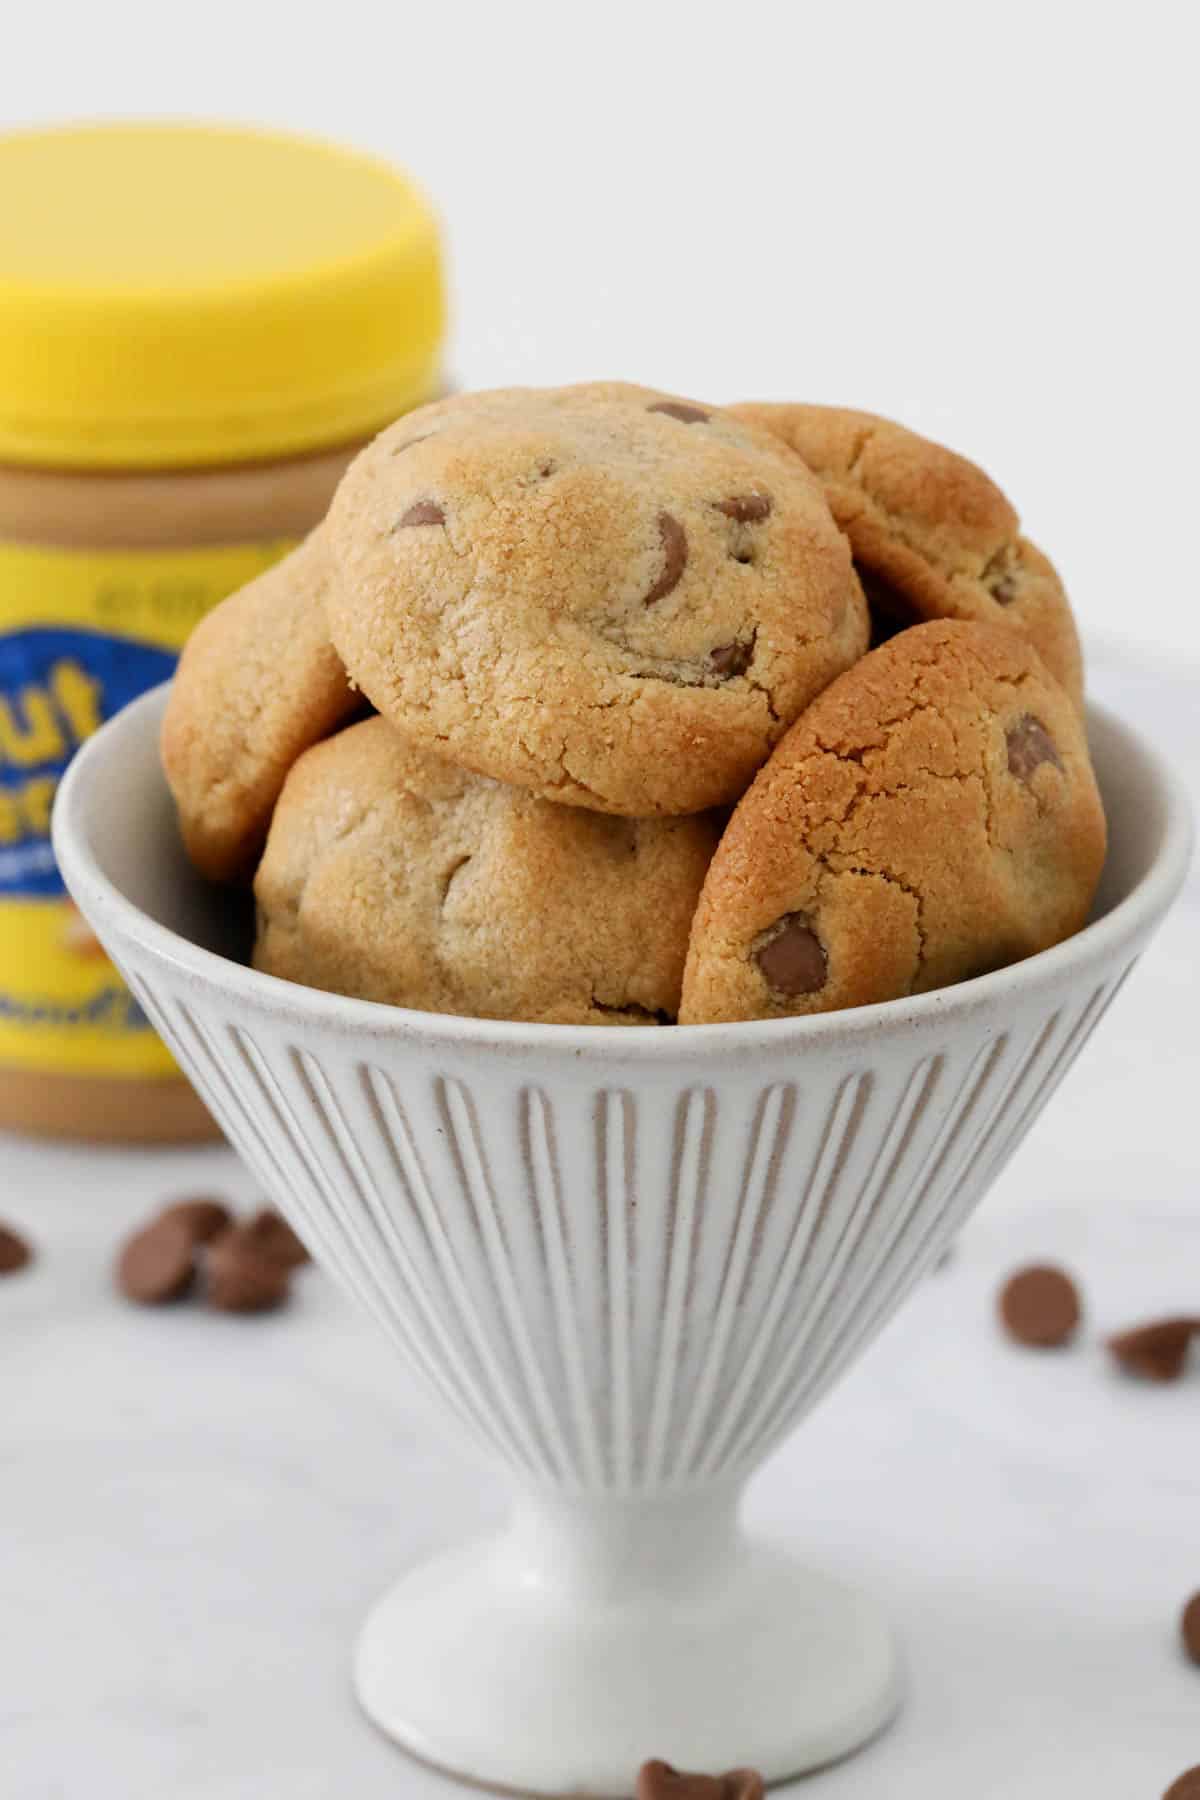 A batch of cookies in a tall bowl.